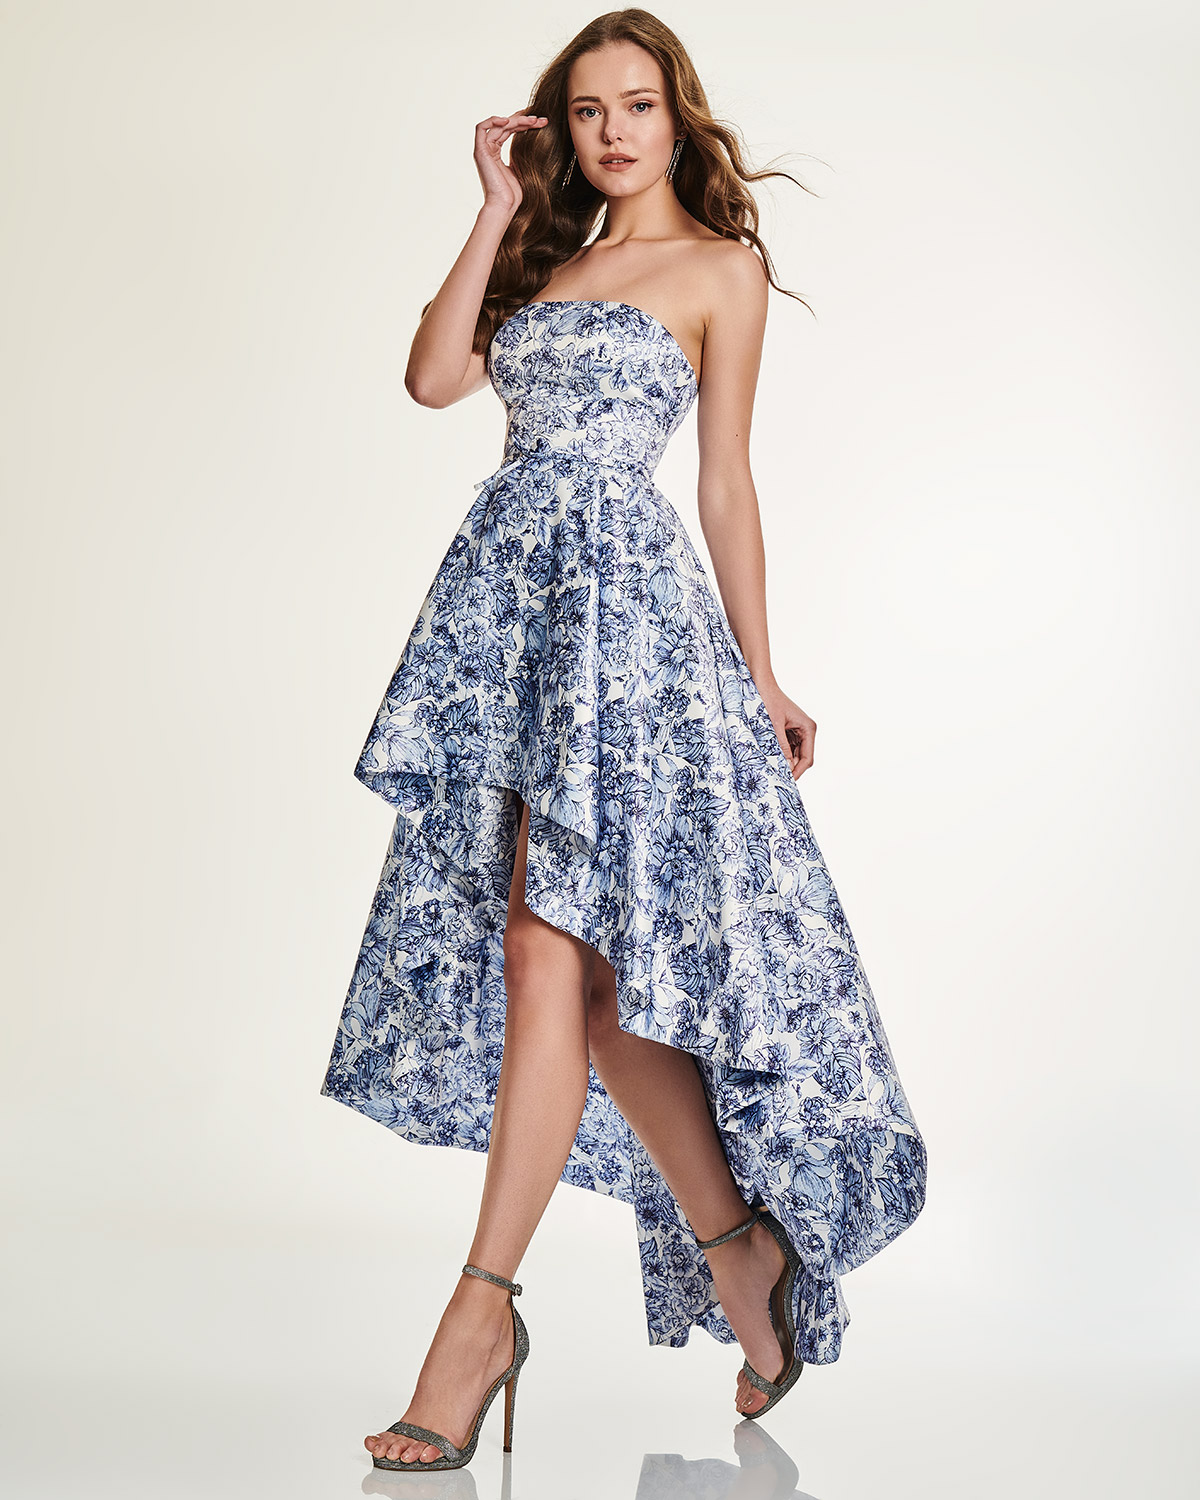 Cocktail Dresses / Cocktail asymmetrical strapless dress with floral motif